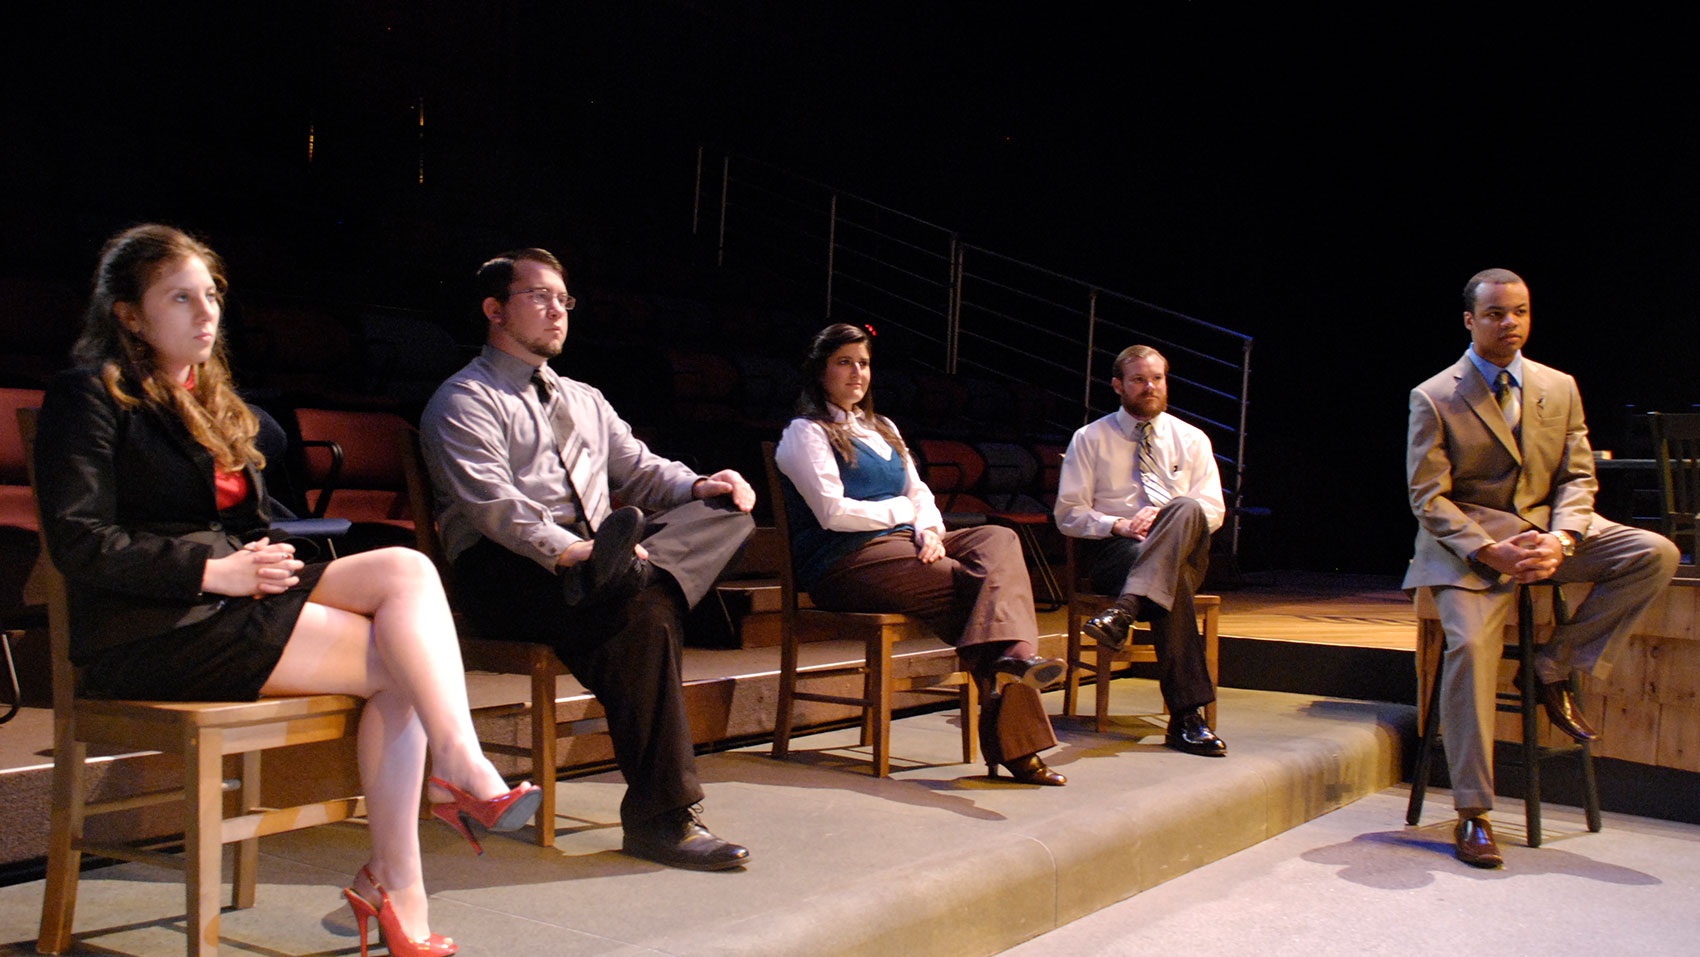 A group of five characters sit in a line, the first four on wooden chairs and the last character on a wooden stool. 